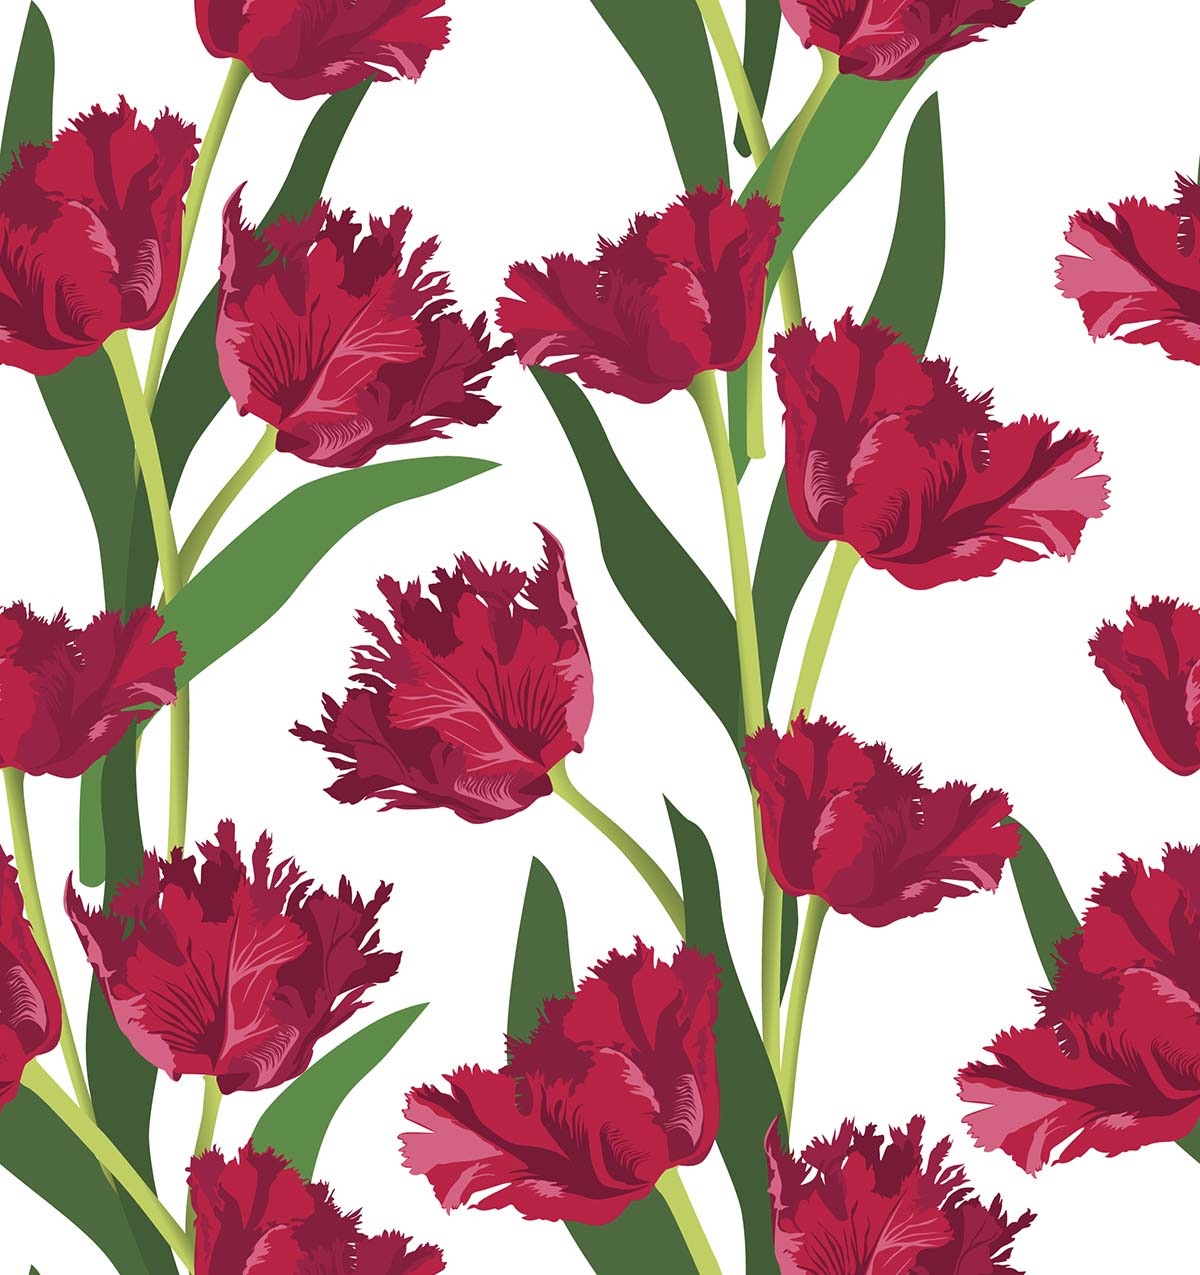 A pattern of red flowers